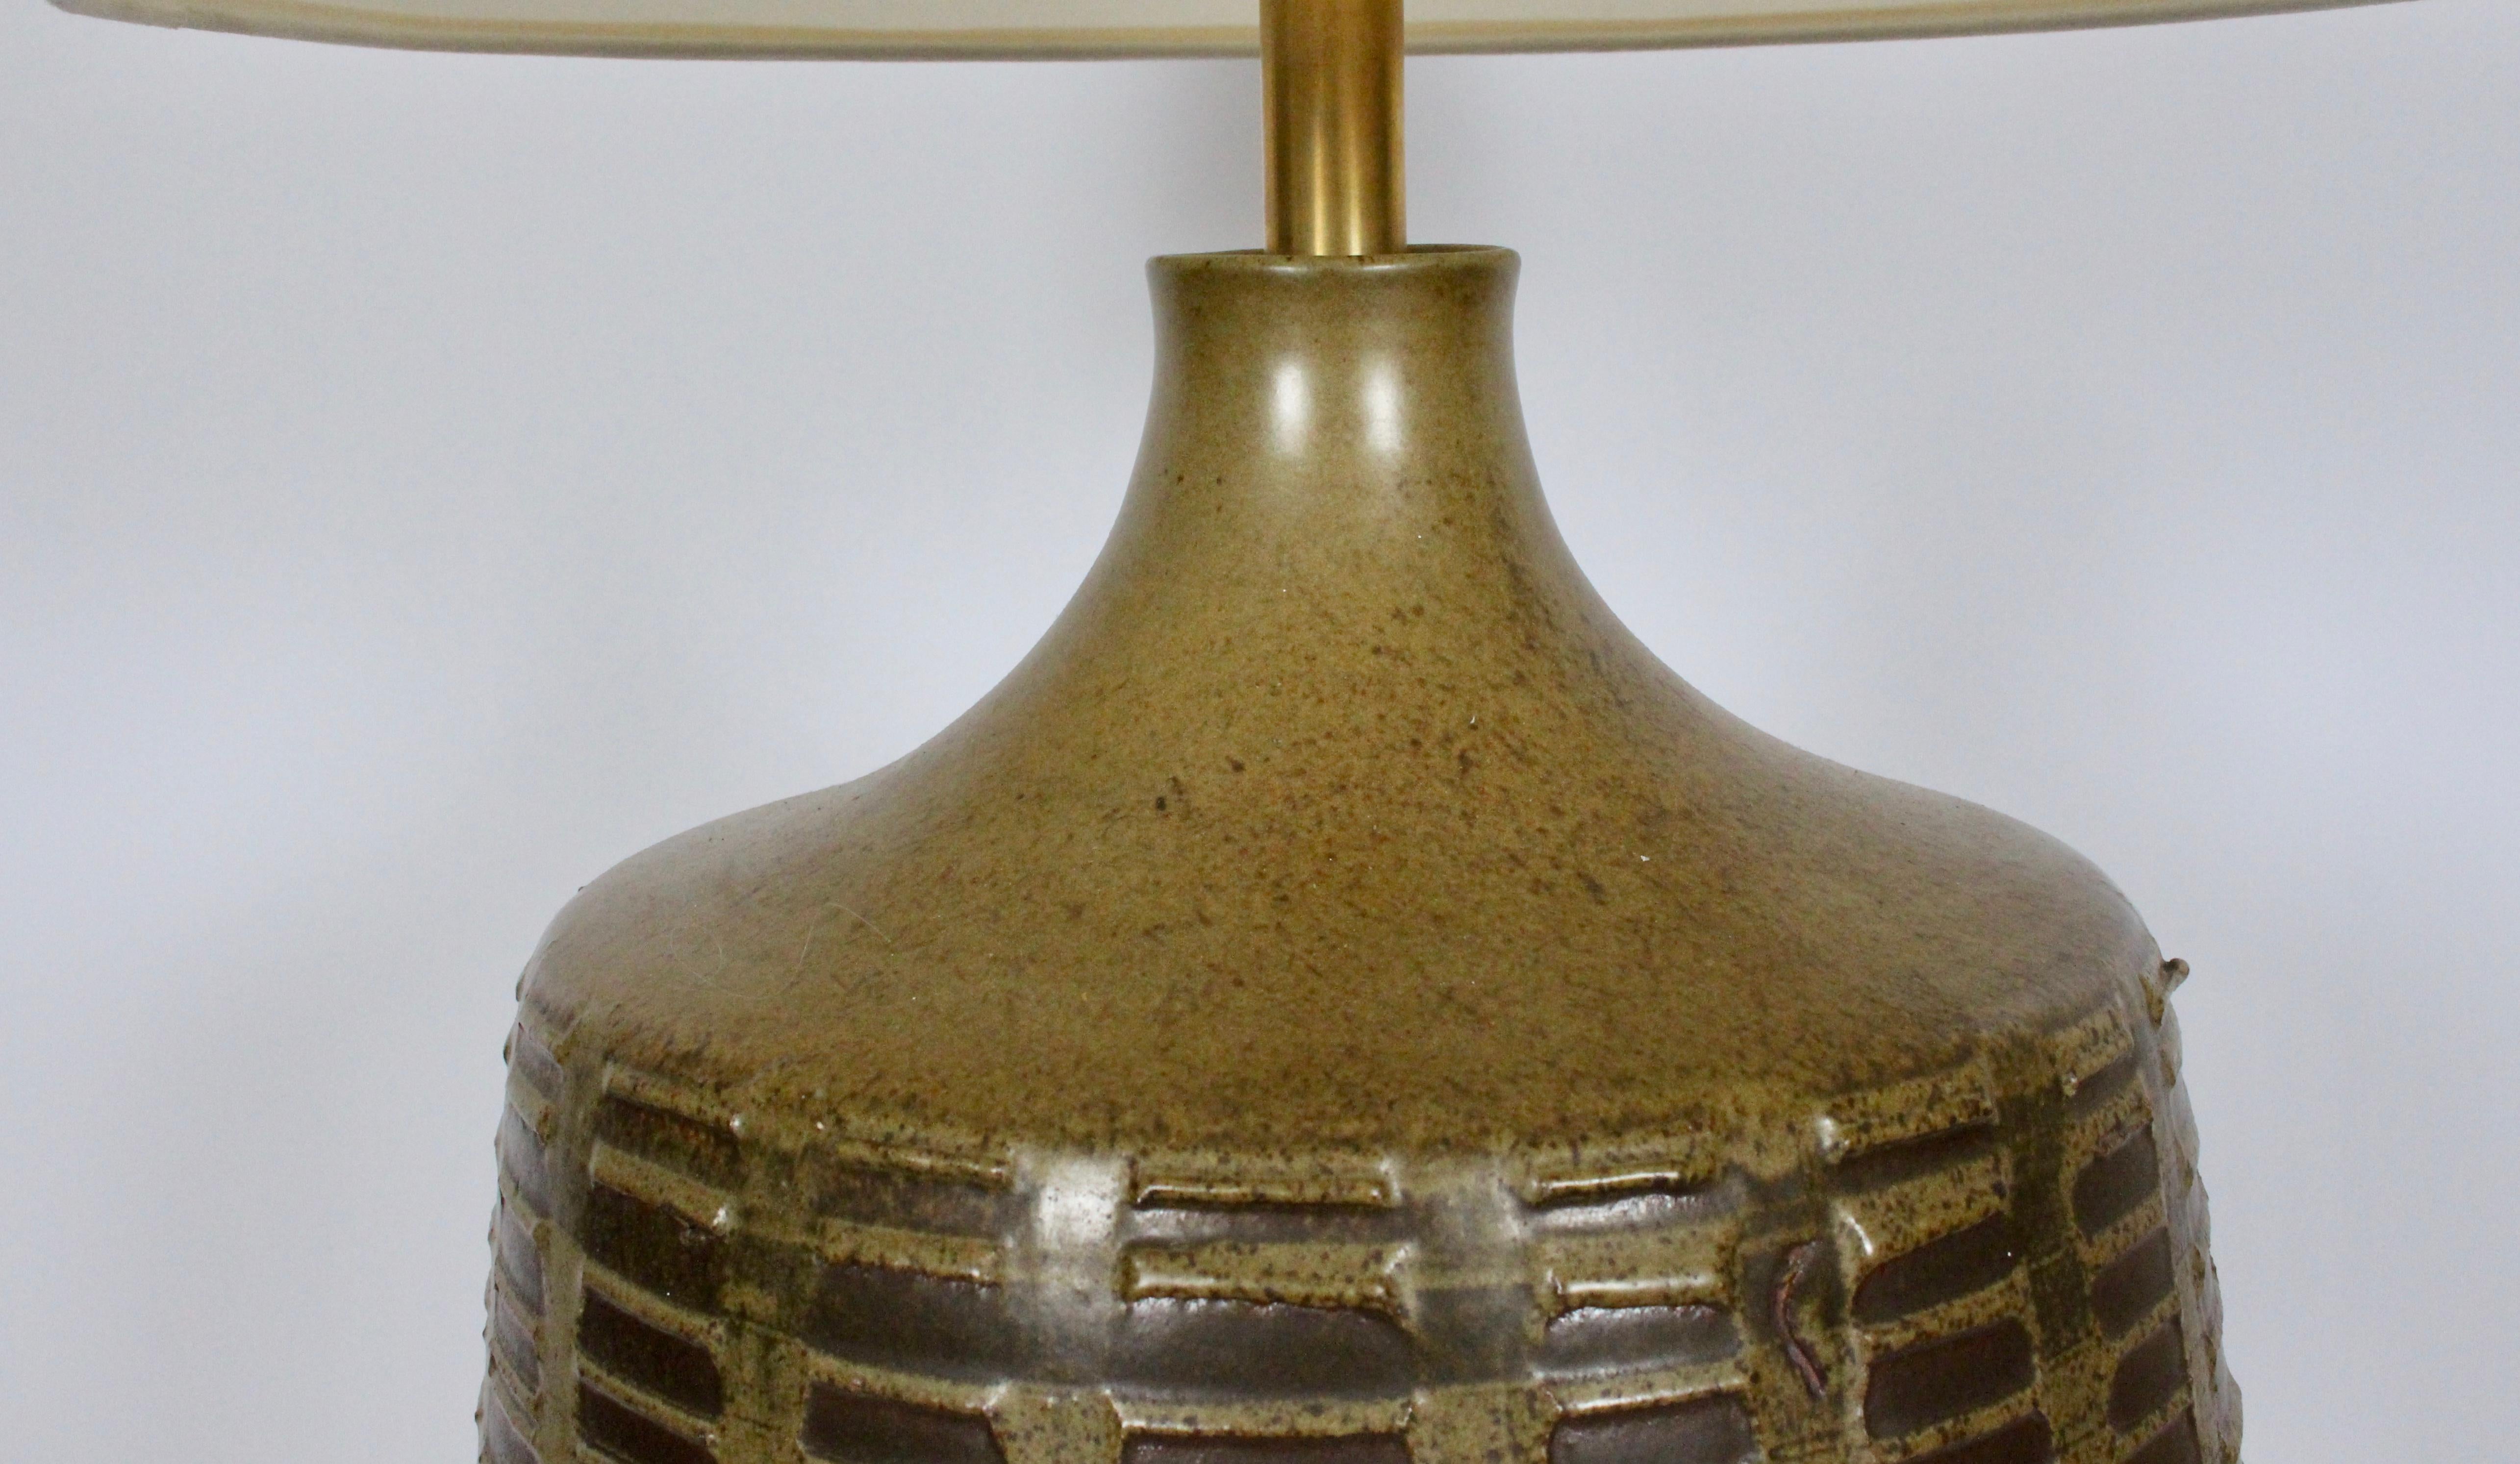 Glazed Substantial David Cressey Olive & Cocoa Patterned Art Pottery Table Lamp